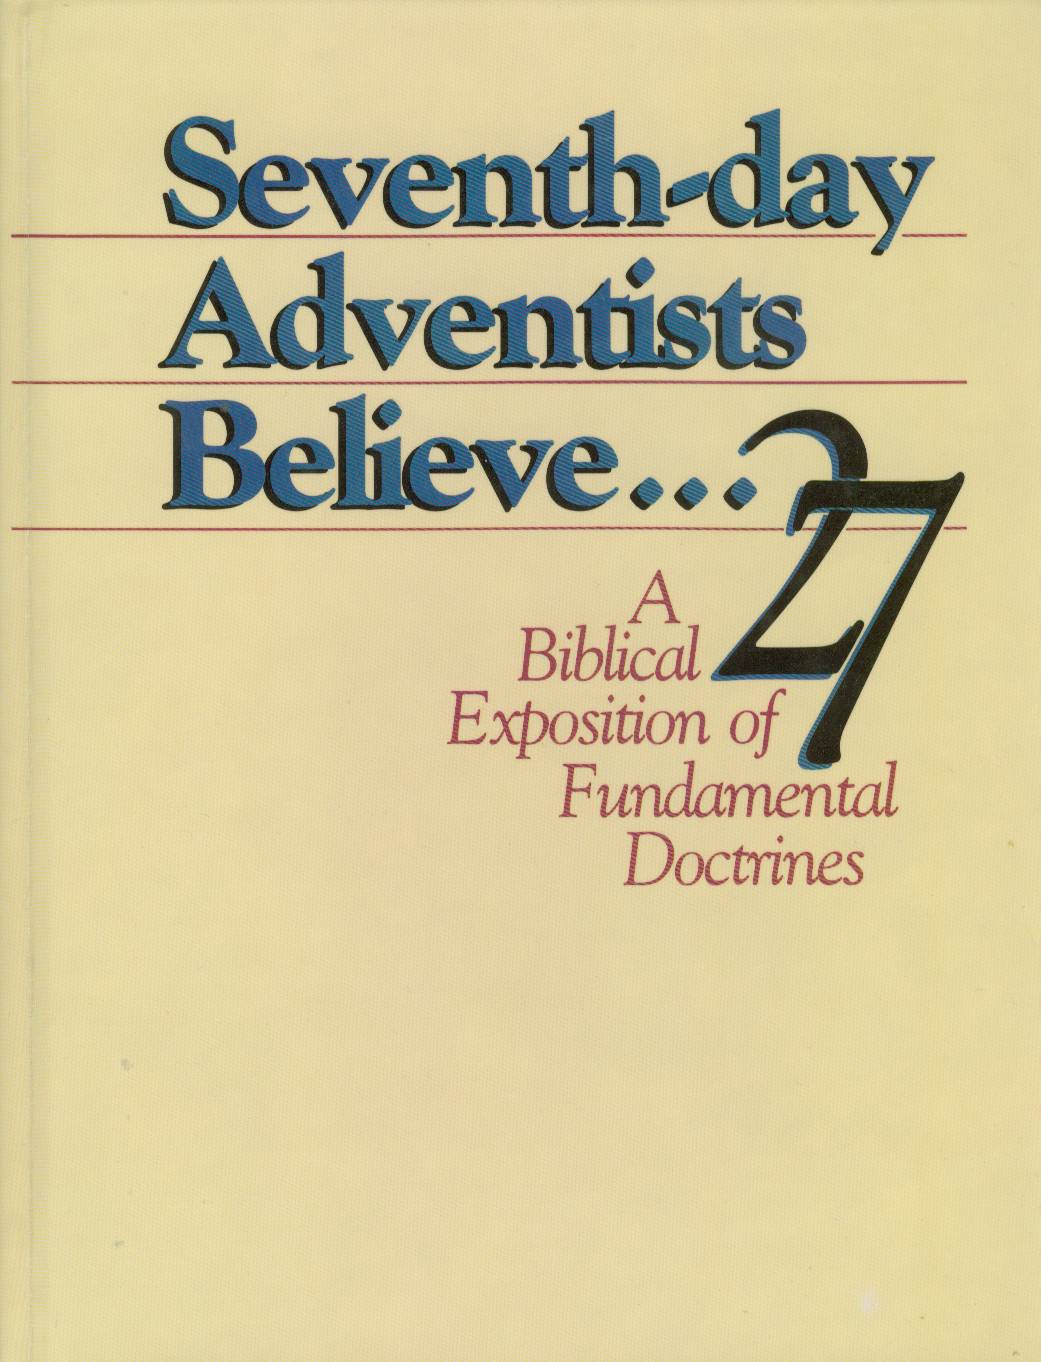 nm*creativ blog: What Seventh-Day Adventists Believe